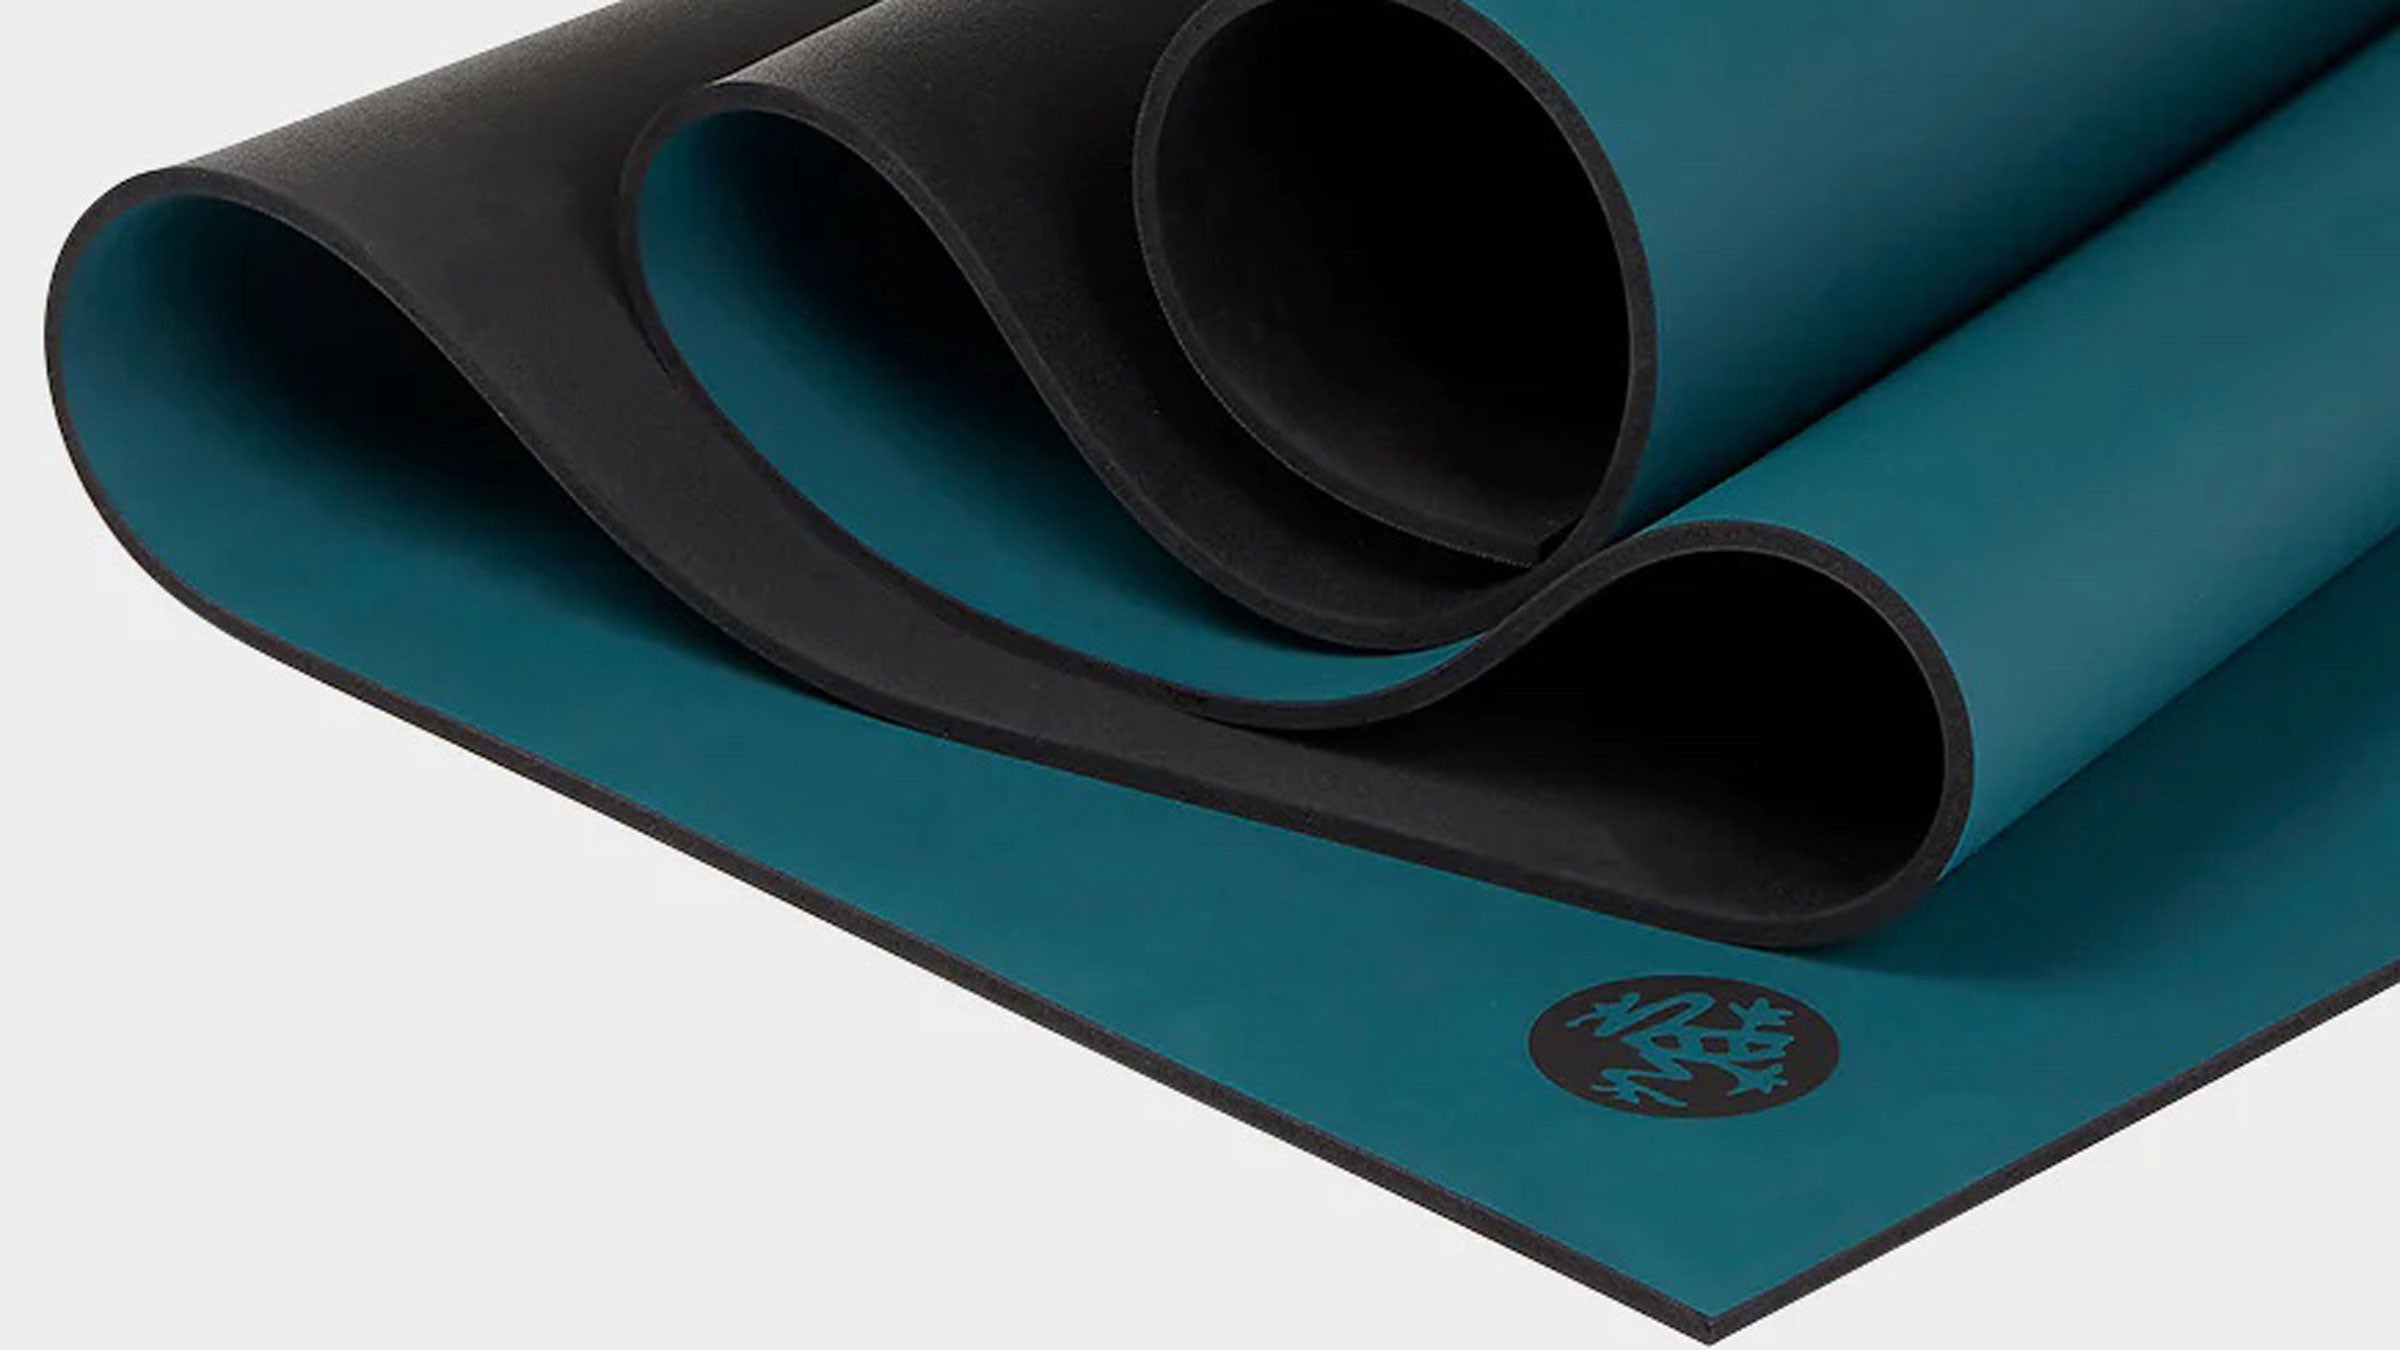  Yoga Gifts For Yoga Lover